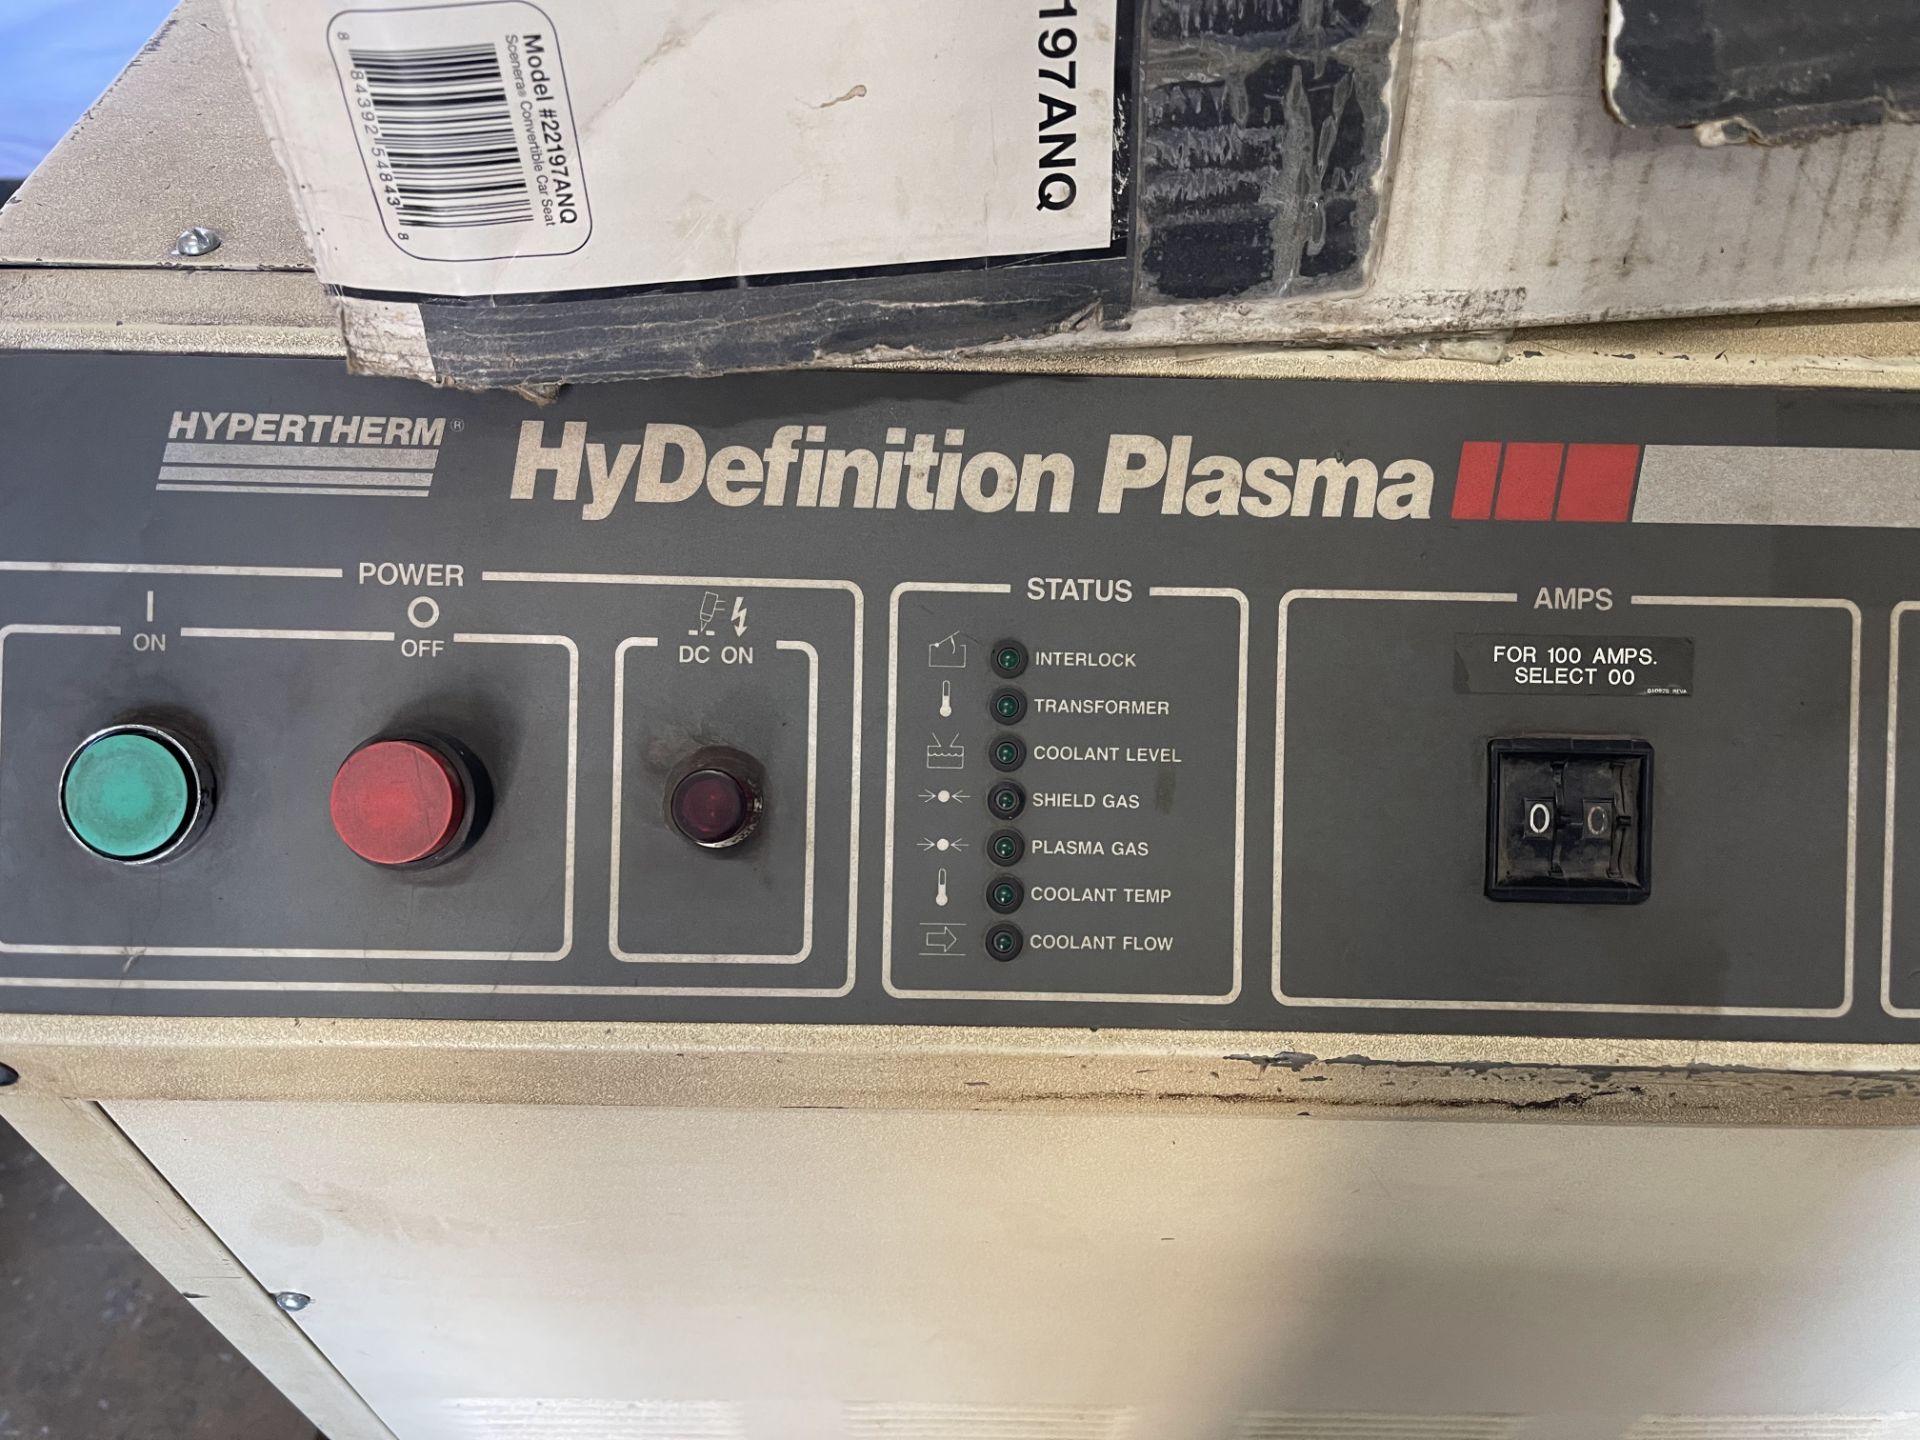 Hypertherm high definition plasma HD 1070 with Messer Pilot controller and servos, with leads, torch - Image 2 of 18